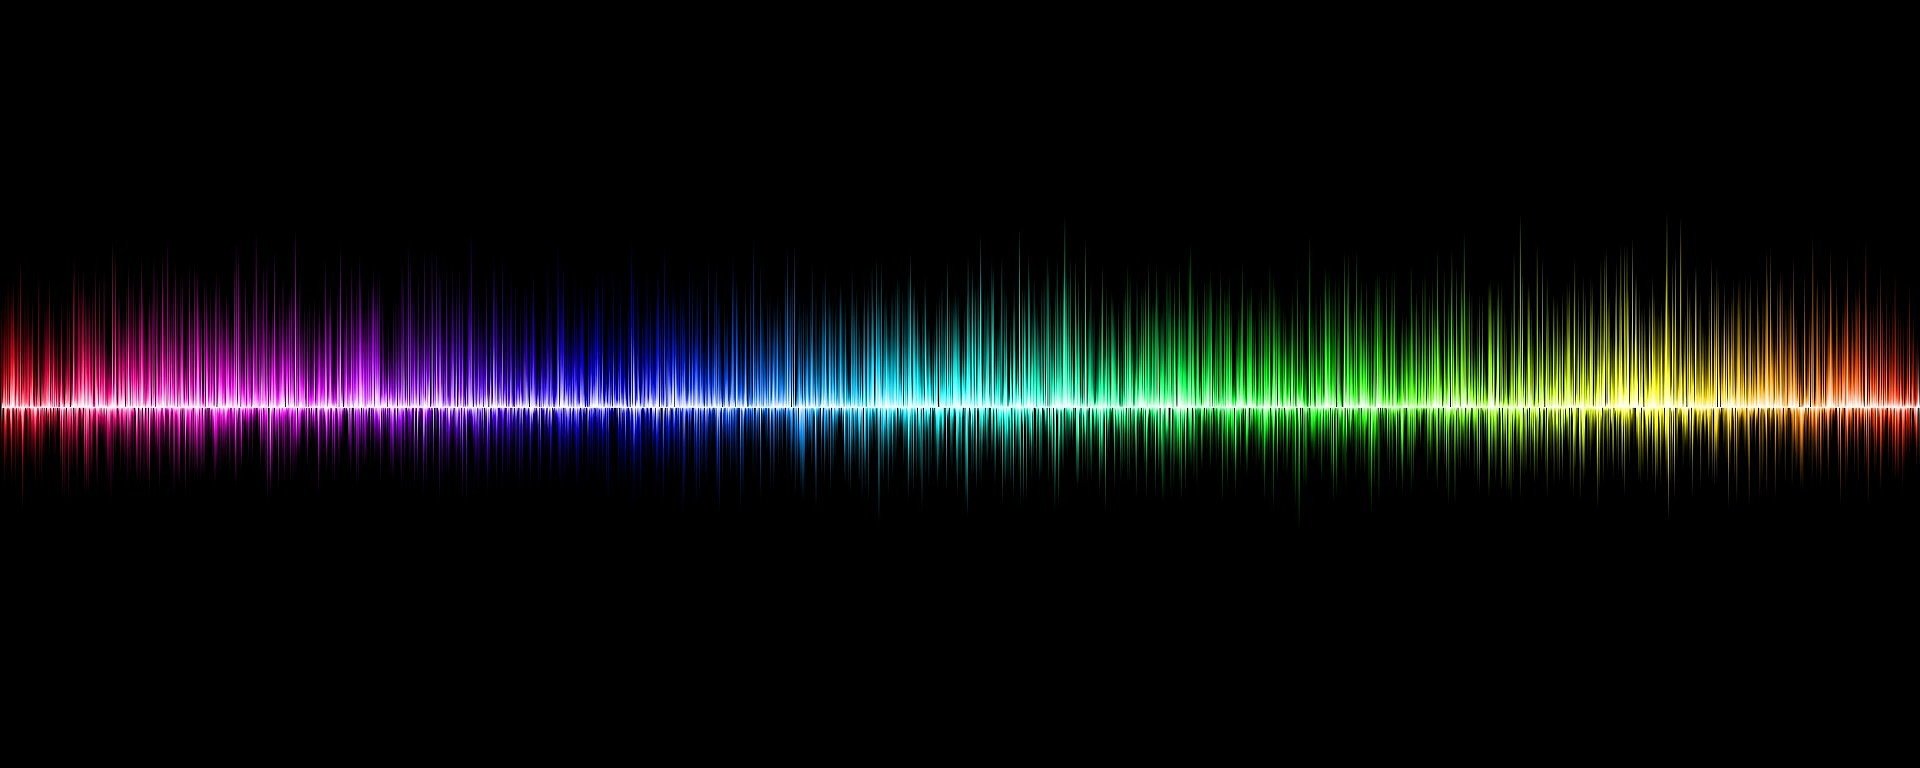 Scientists achieve major breakthrough in preserving integrity of sound waves